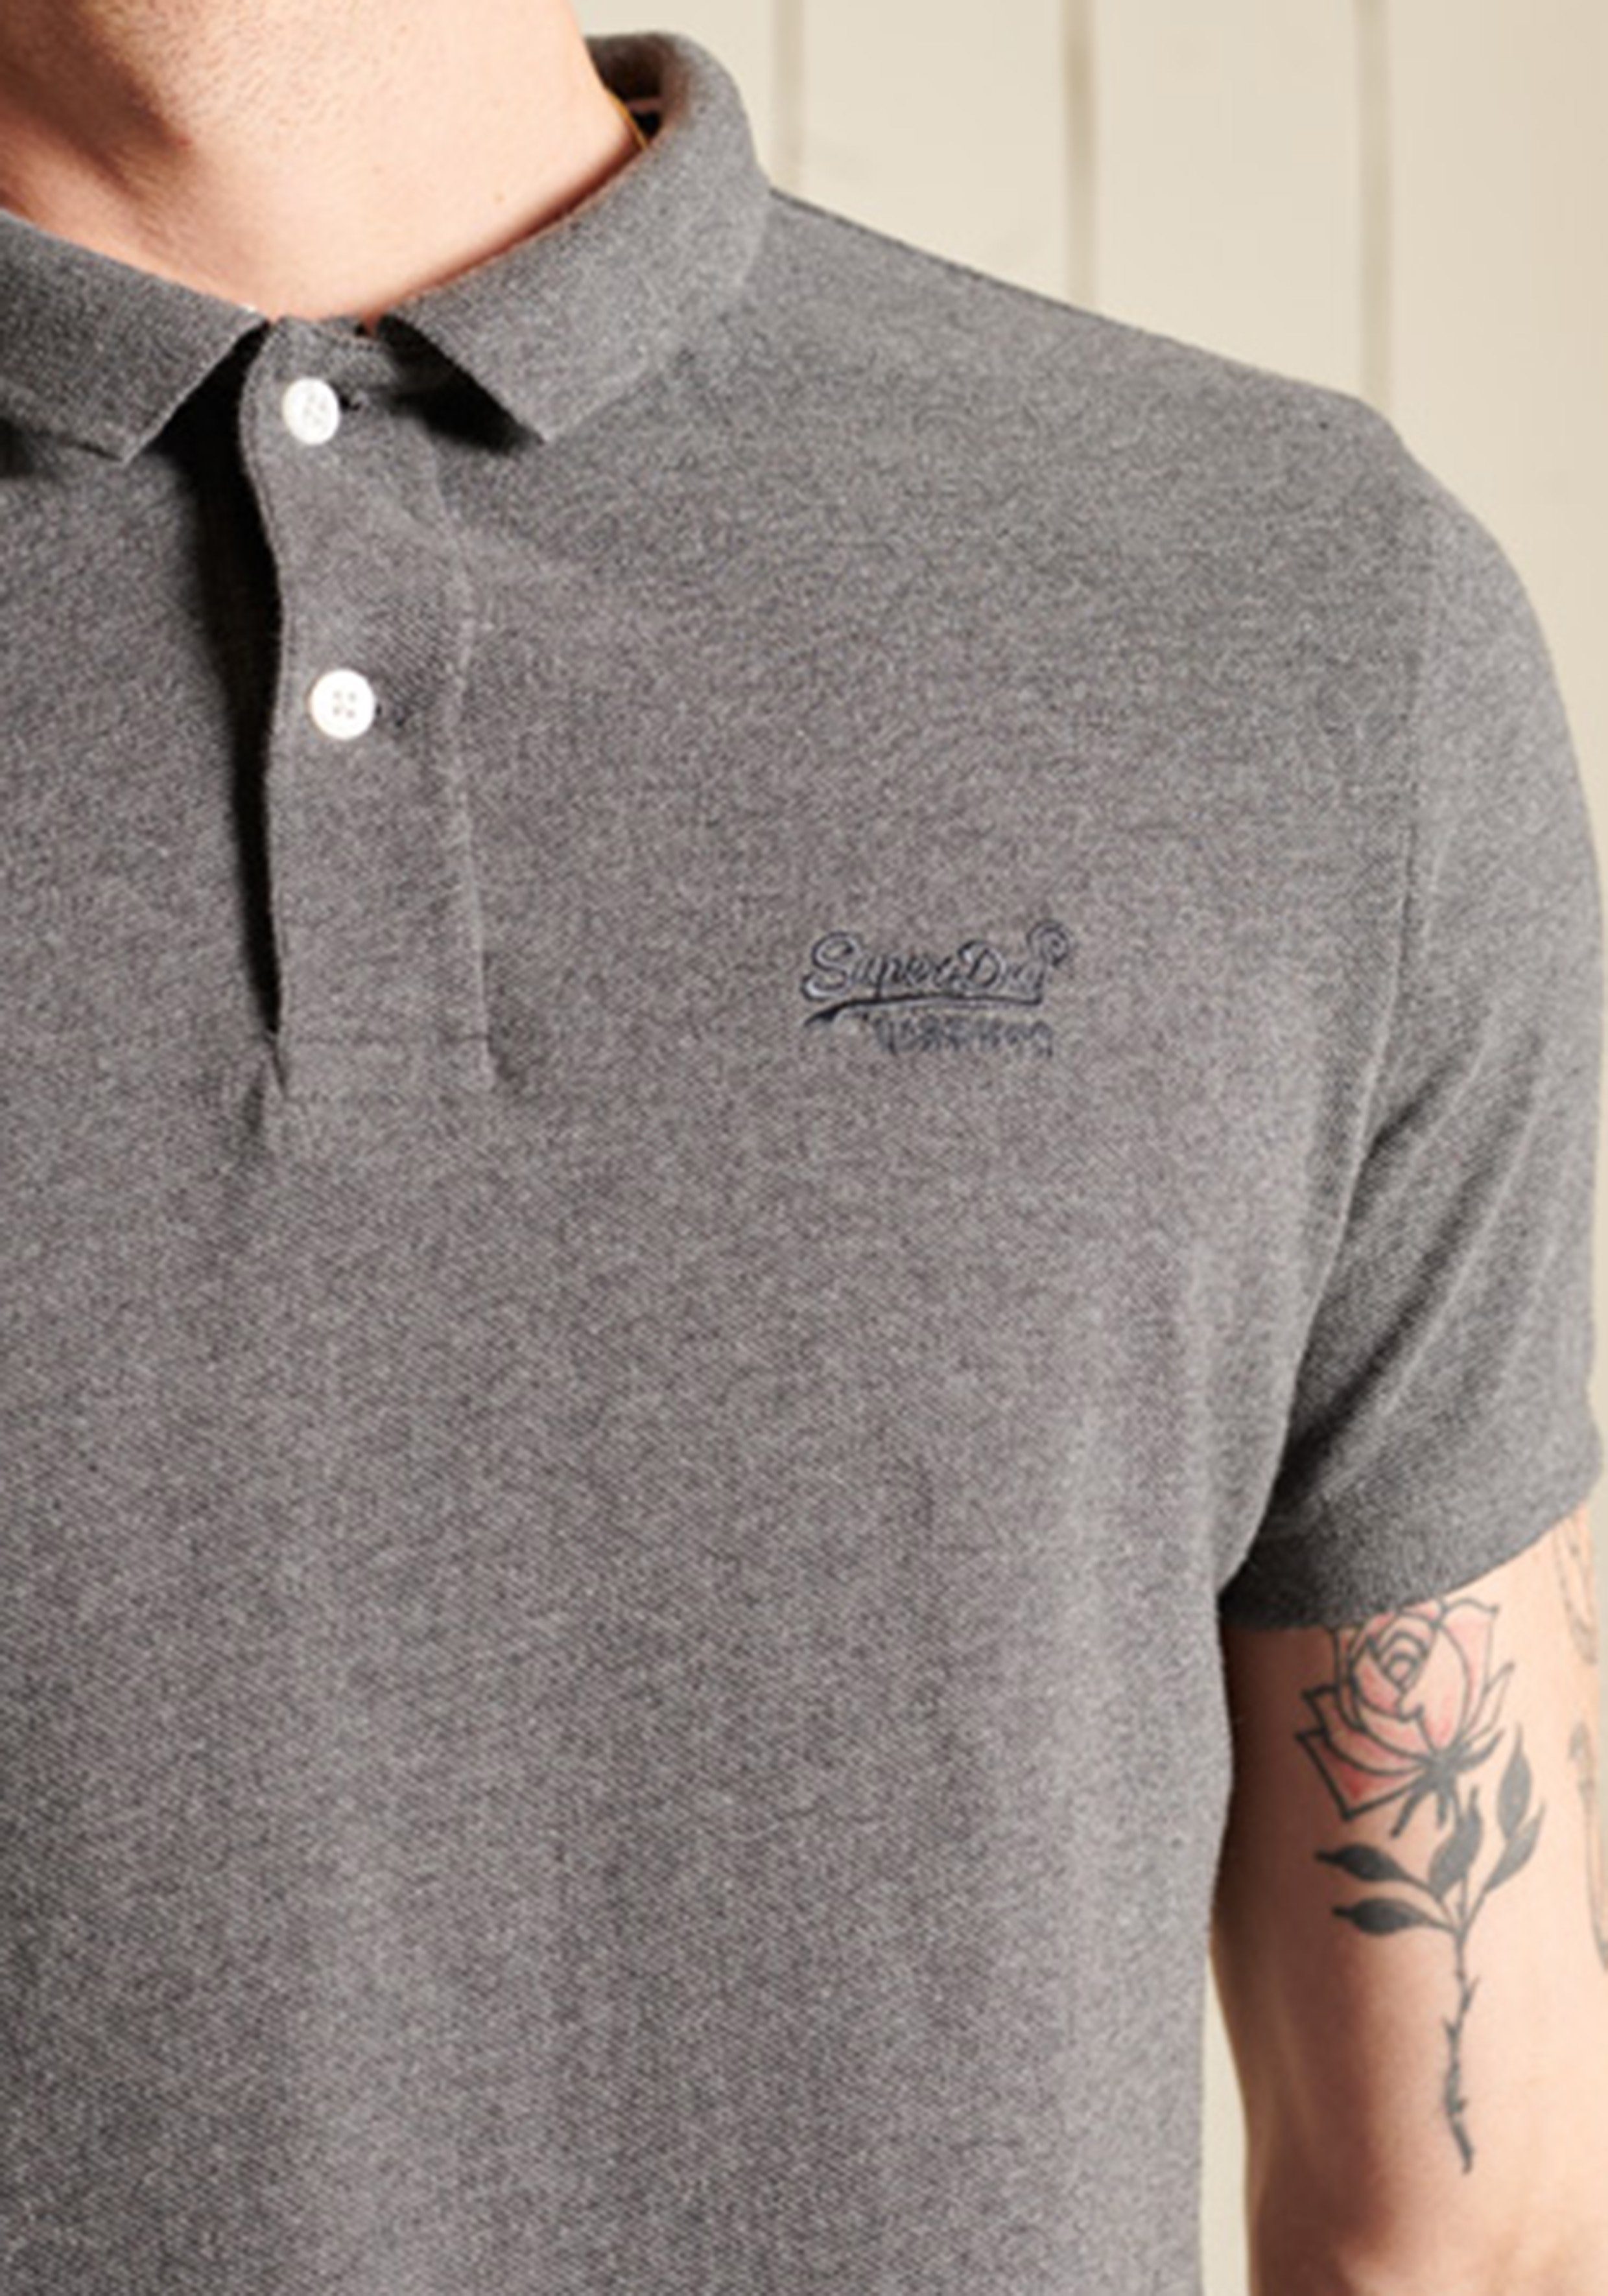 Poloshirt PIQUE rich Superdry POLO CLASSIC marl charcoal